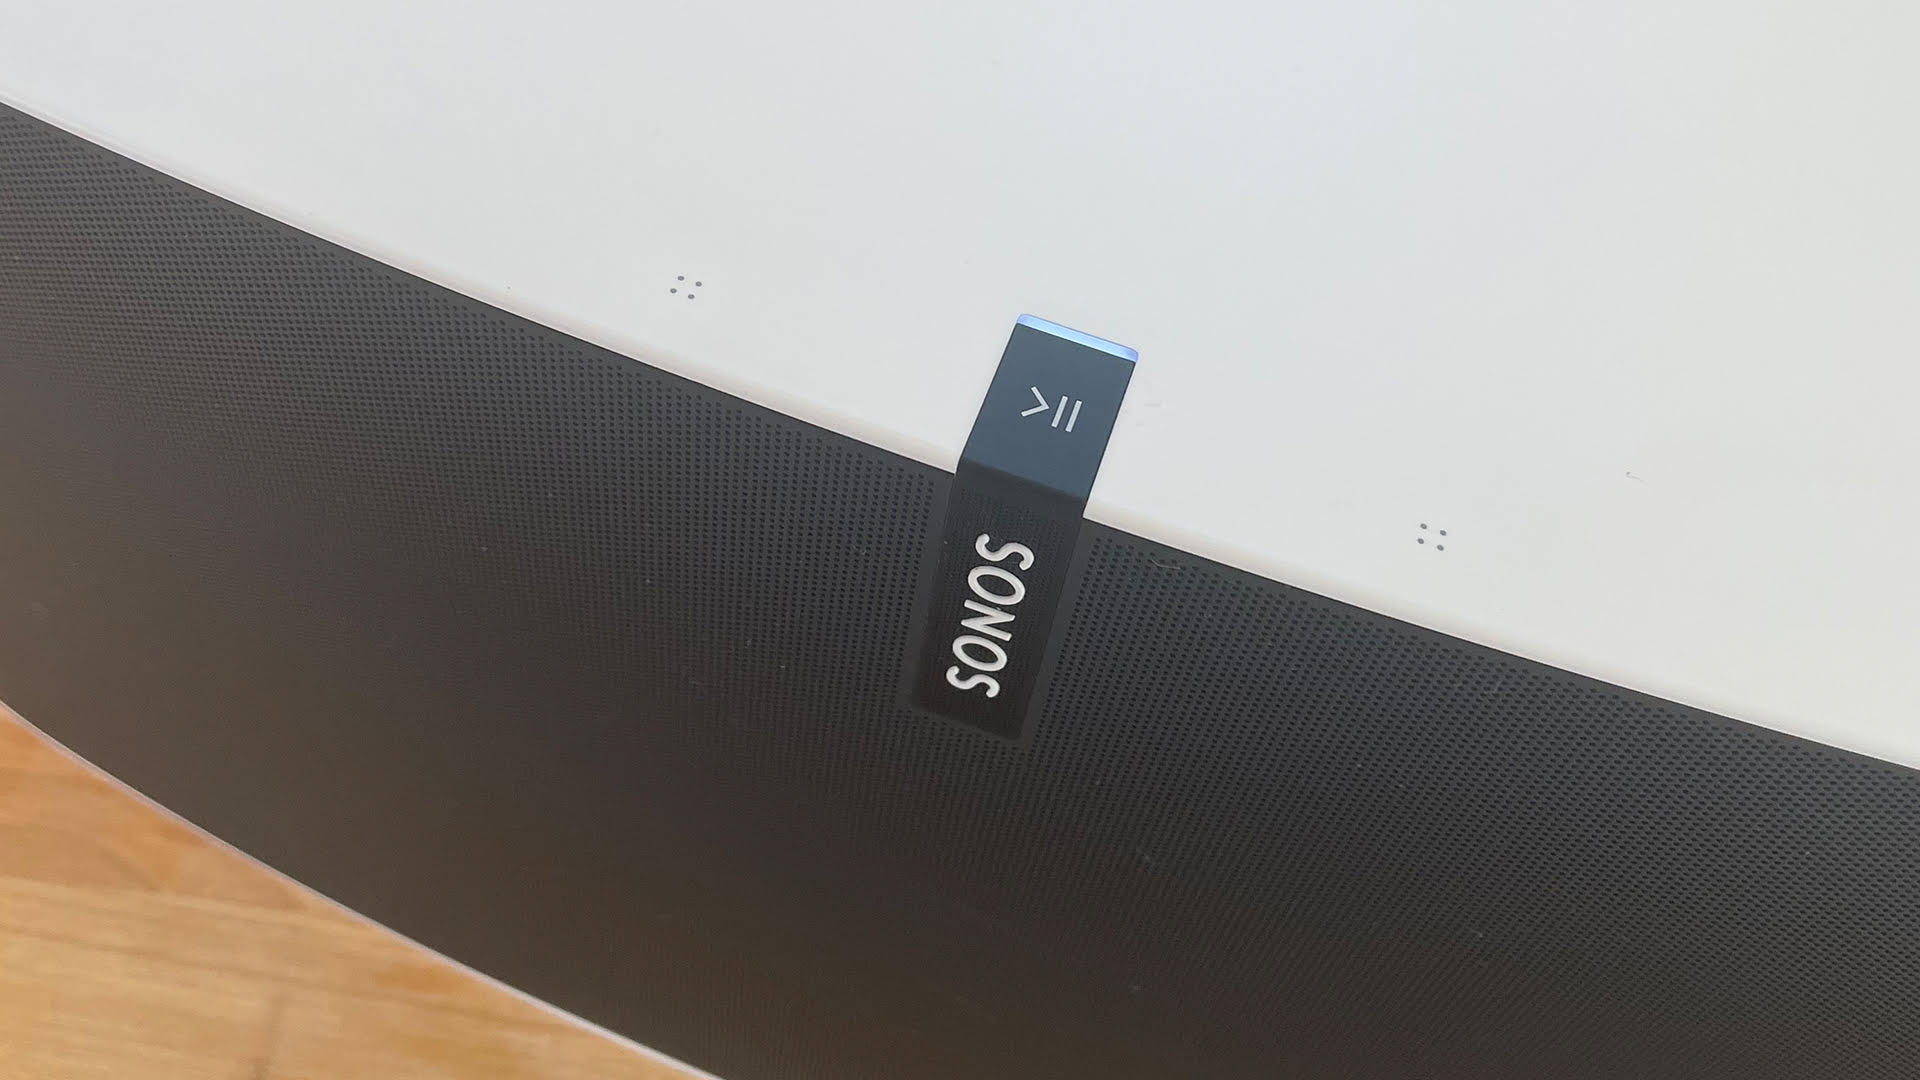 Sonos Play:5 with touch controls and status light